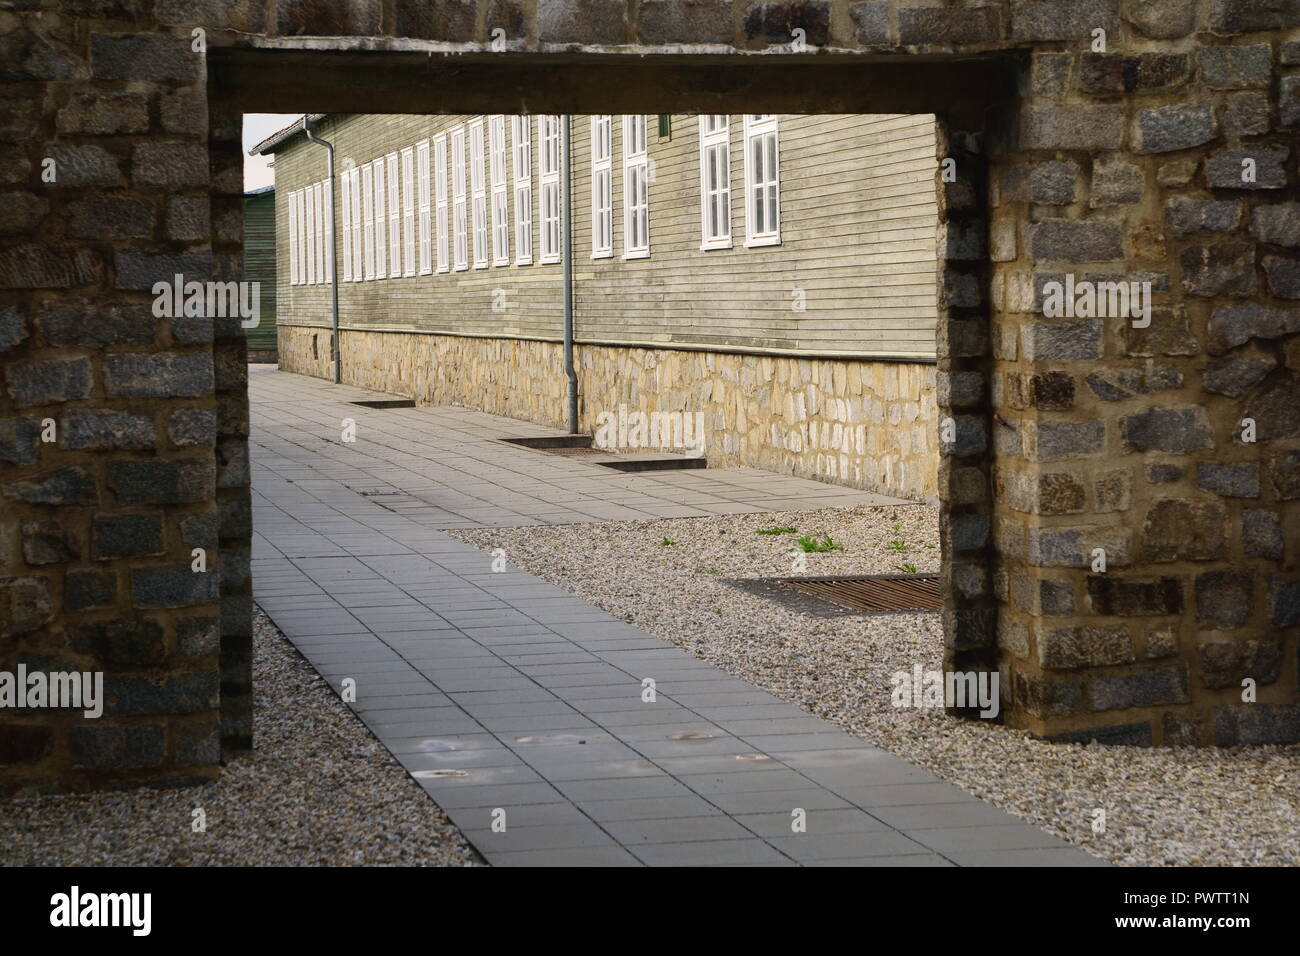 Mauthausen-We must never allow this again Stock Photo